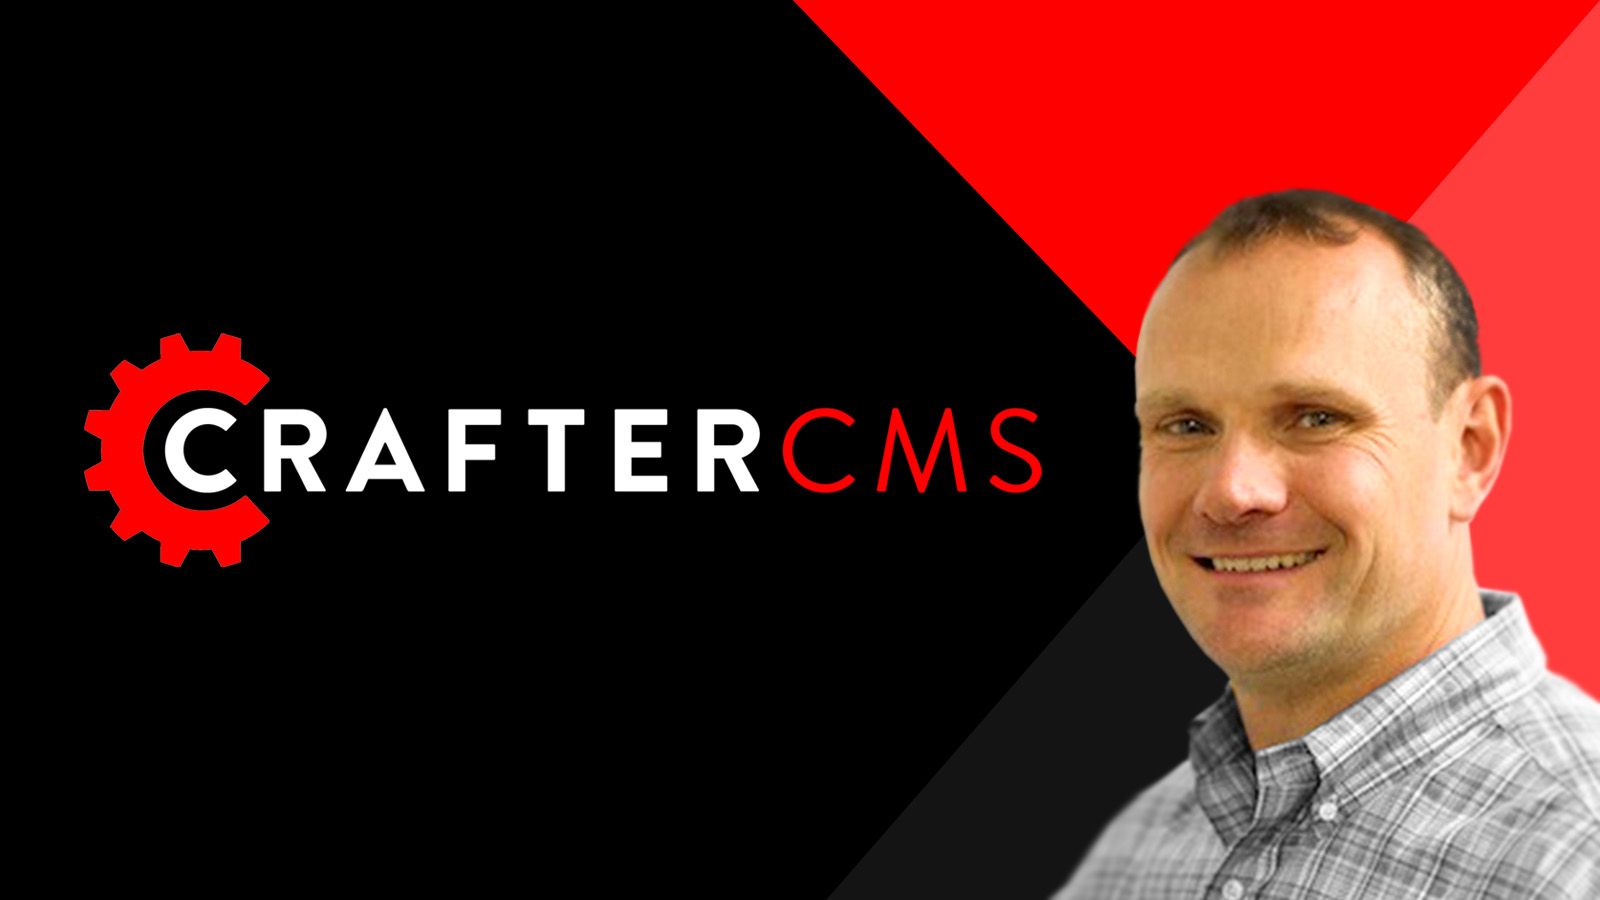 CrafterCMS Announces Second Round of Financing to Fuel Rapid Growth ...